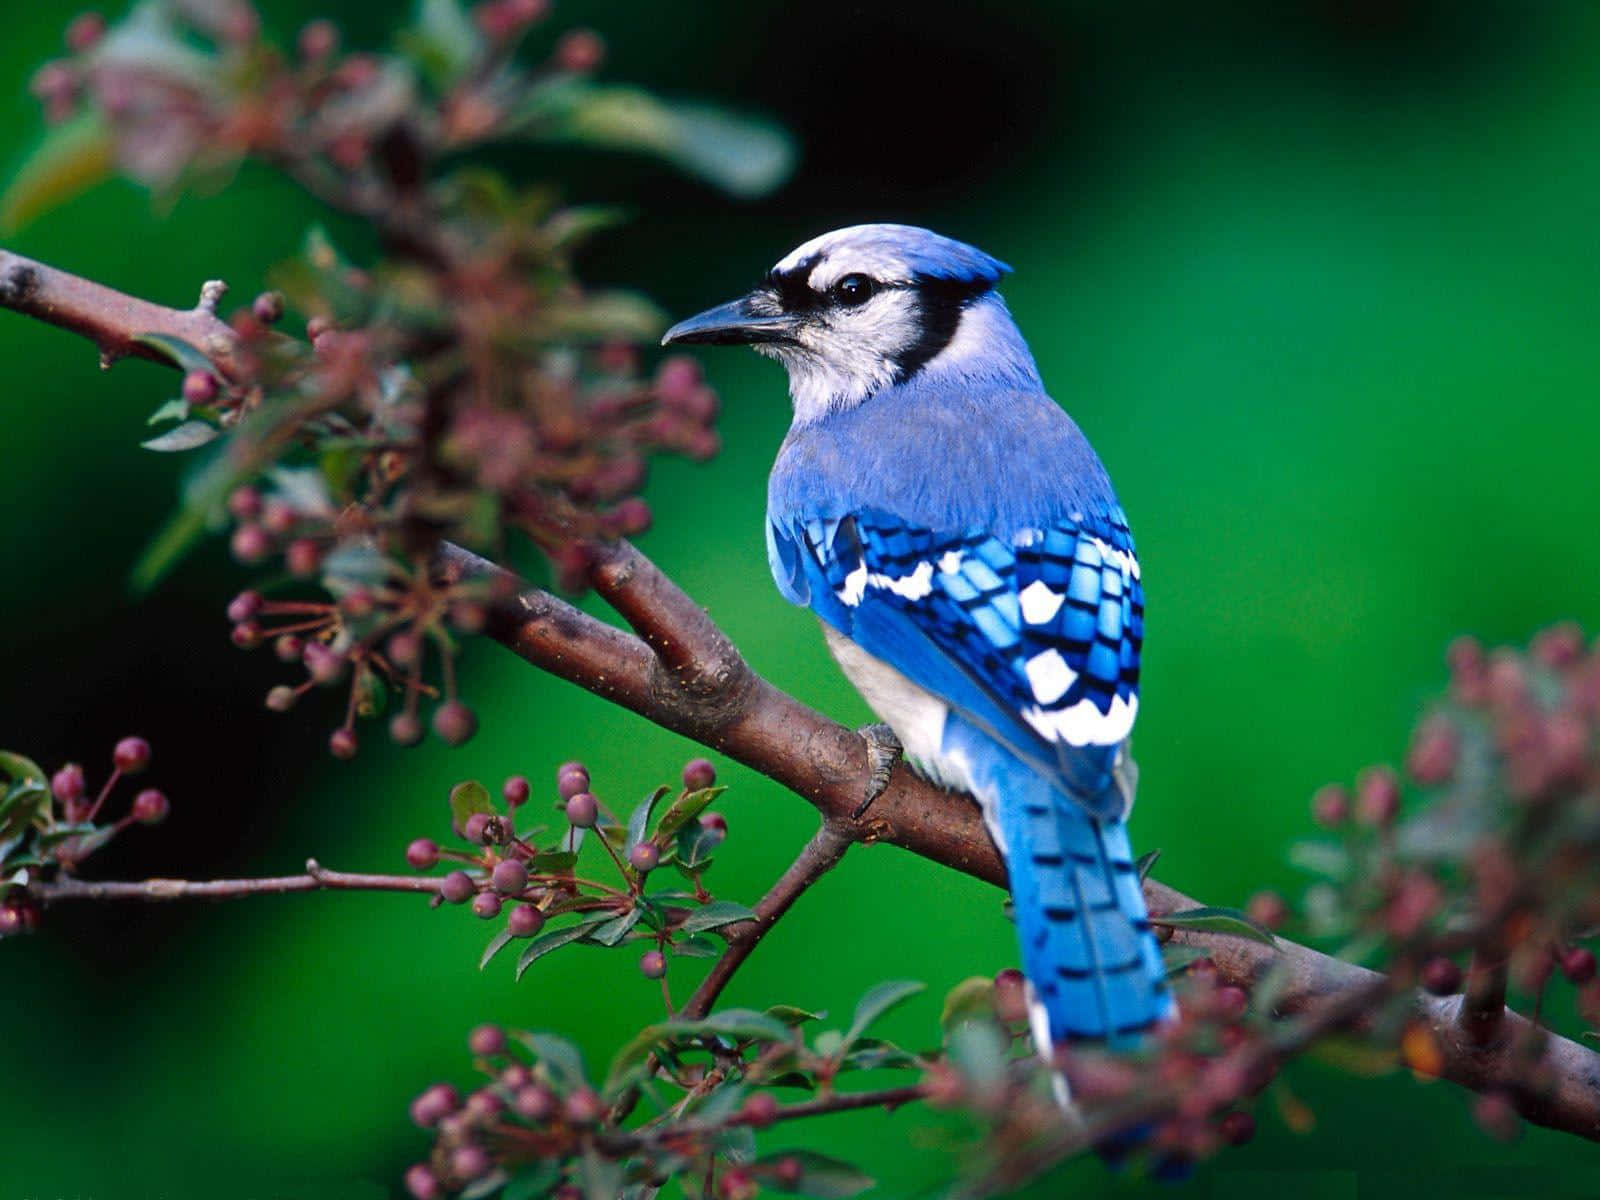 A Blue Bird Is Sitting On A Branch With Green Leaves